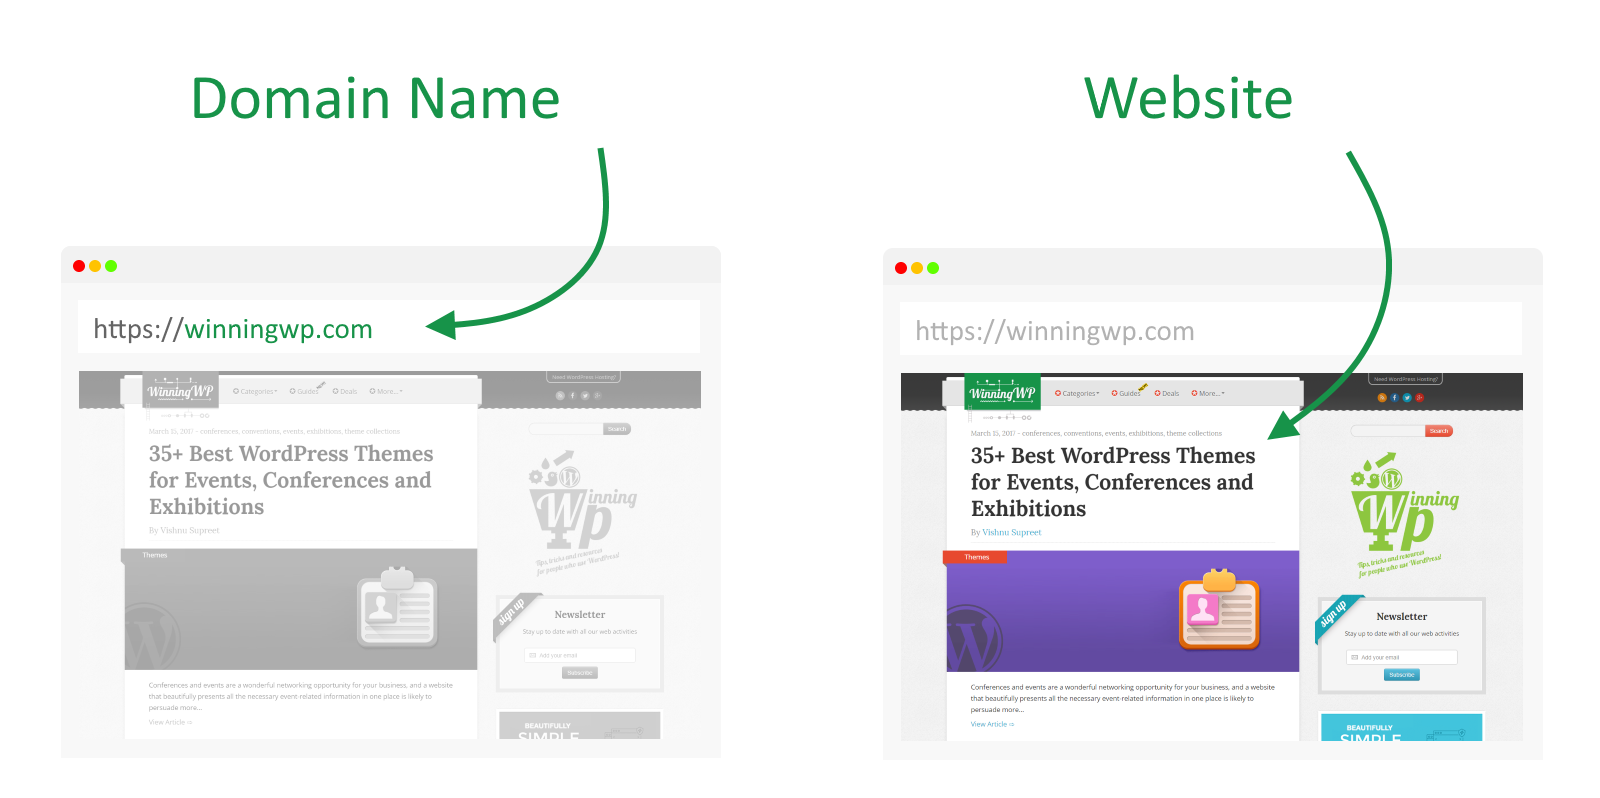 The difference between a website and a domain name.